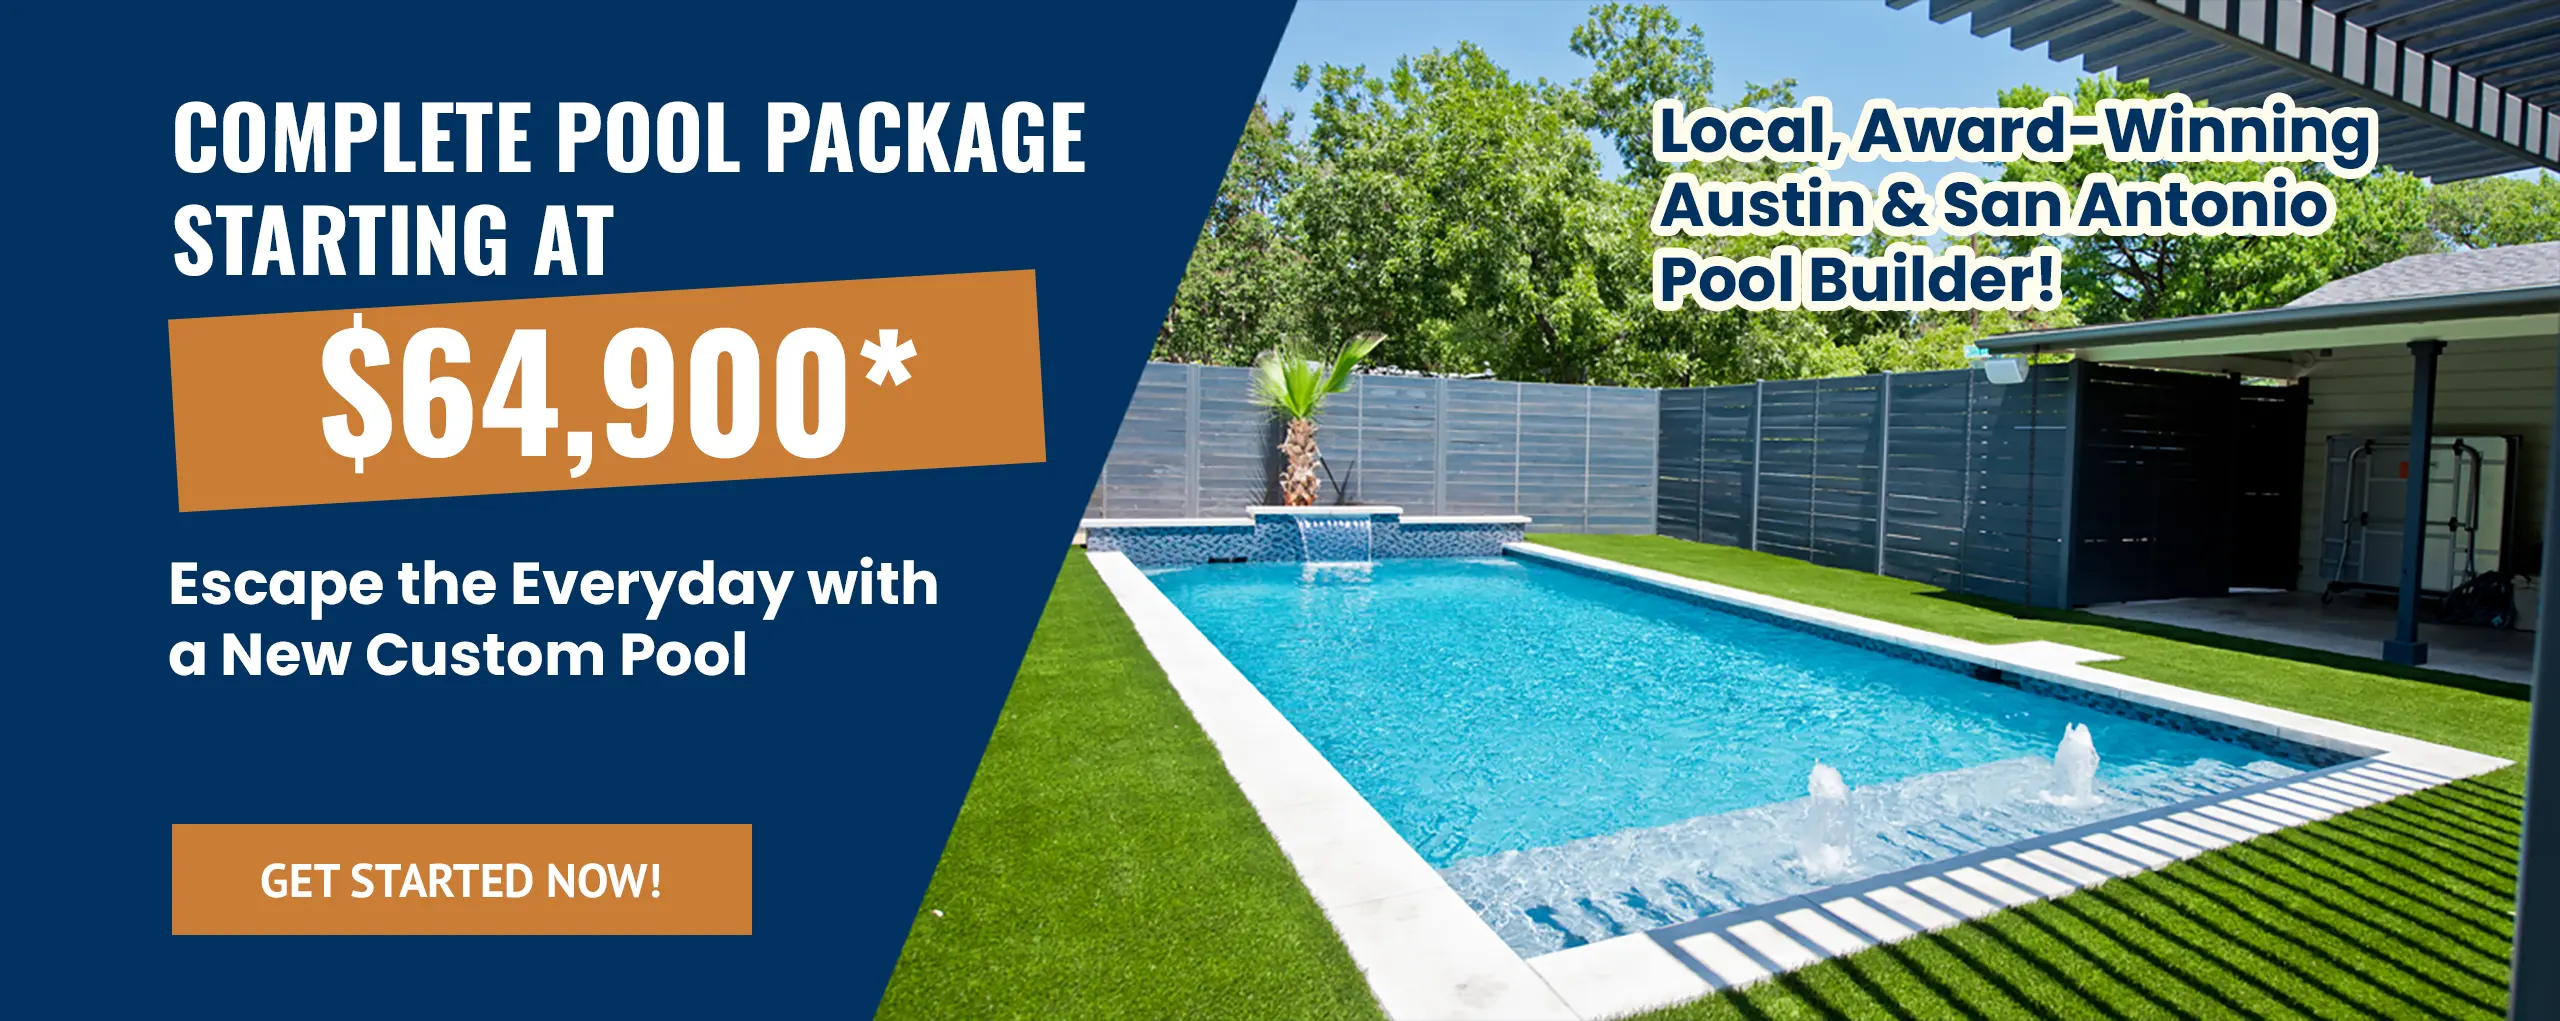 Complete Pool Package Starting at $64,900